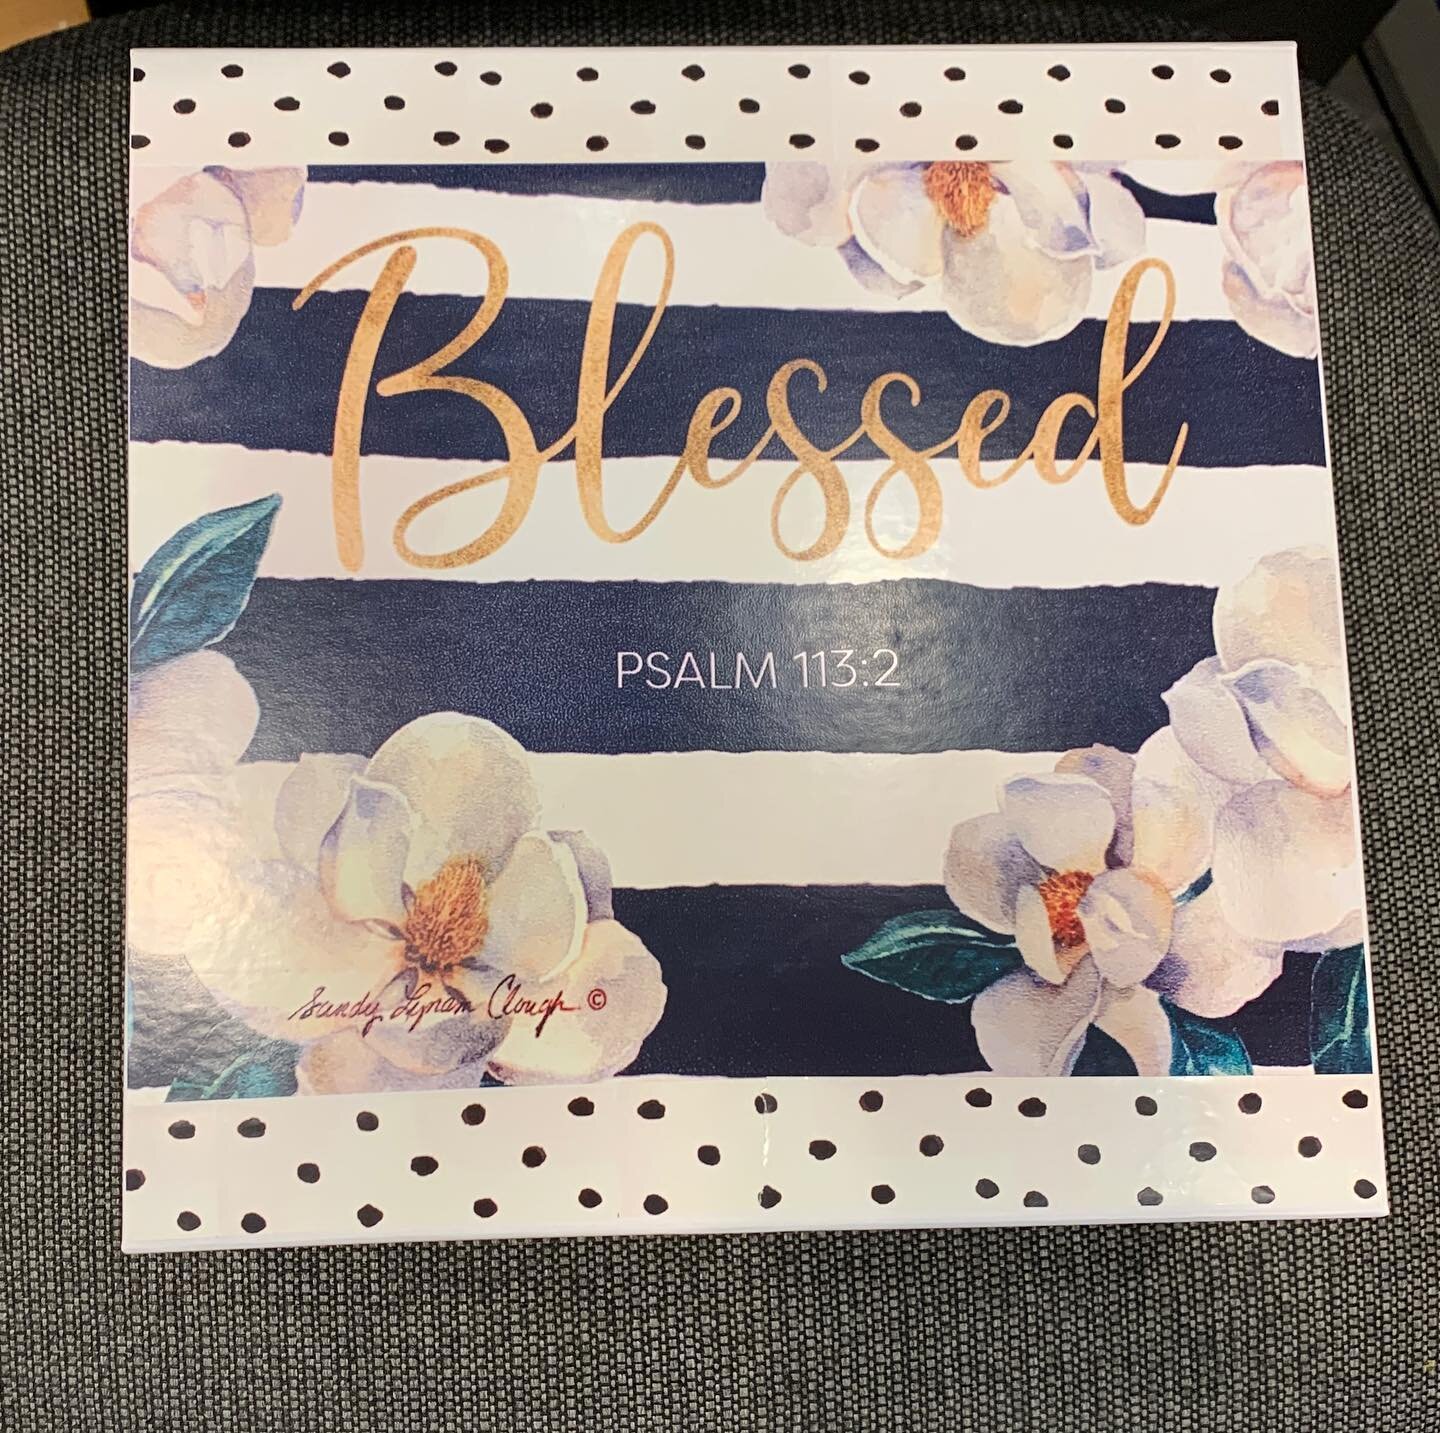 Blessed Gift Box.  Coming soon!